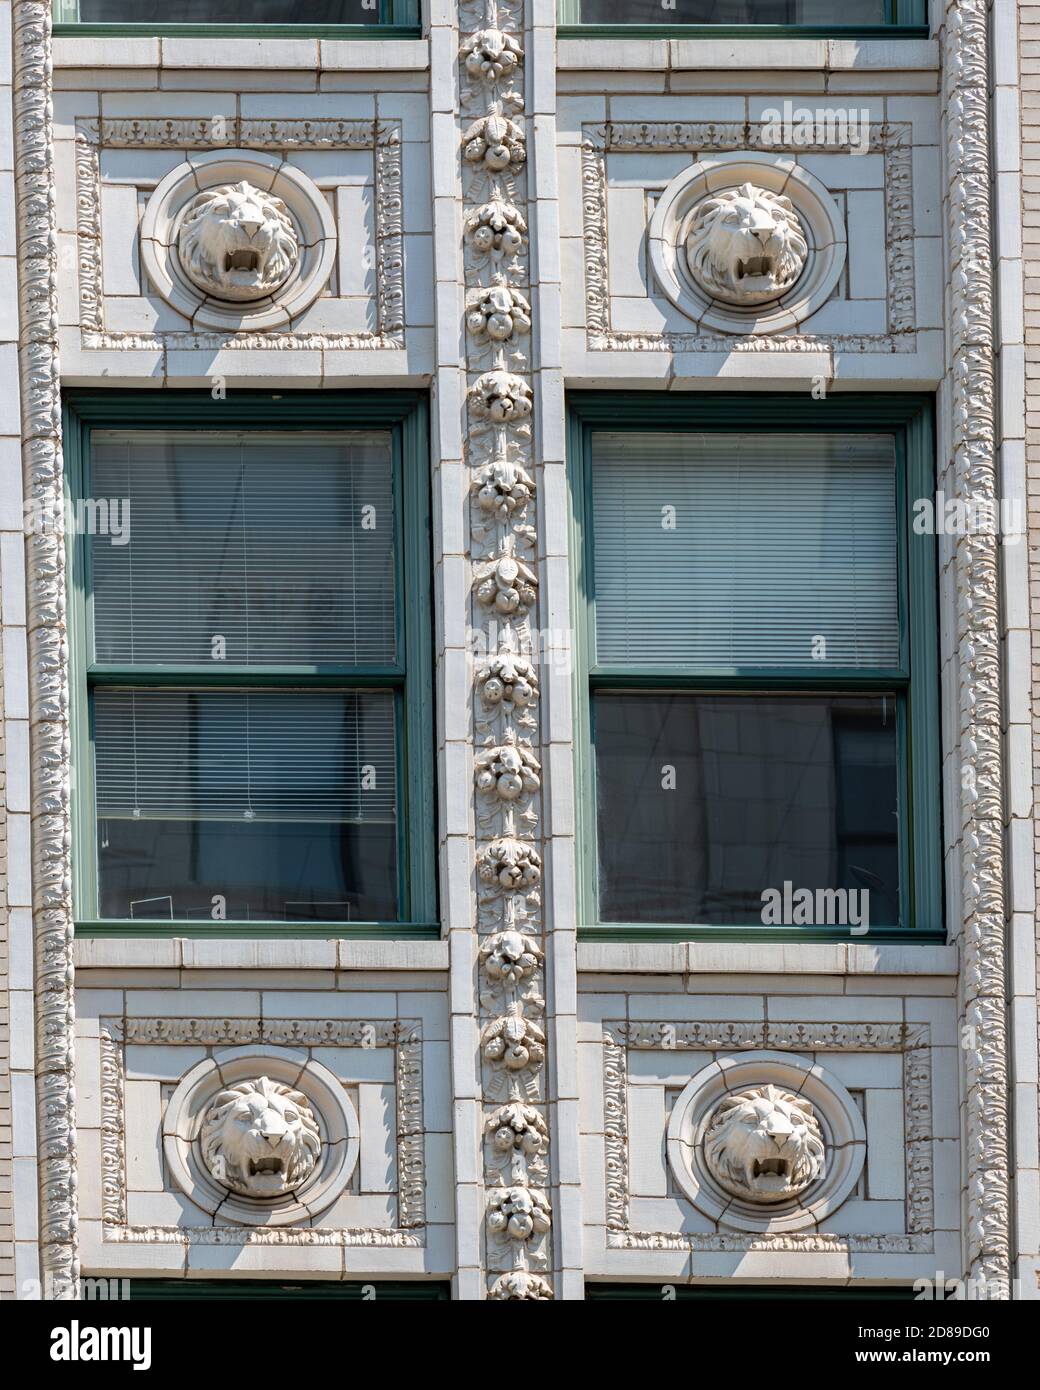 Carved male Lions' heads on Daniel Burnham's elaborate Beaux Arts Southern Building on 15th and H Streets NW in Washington DC Stock Photo